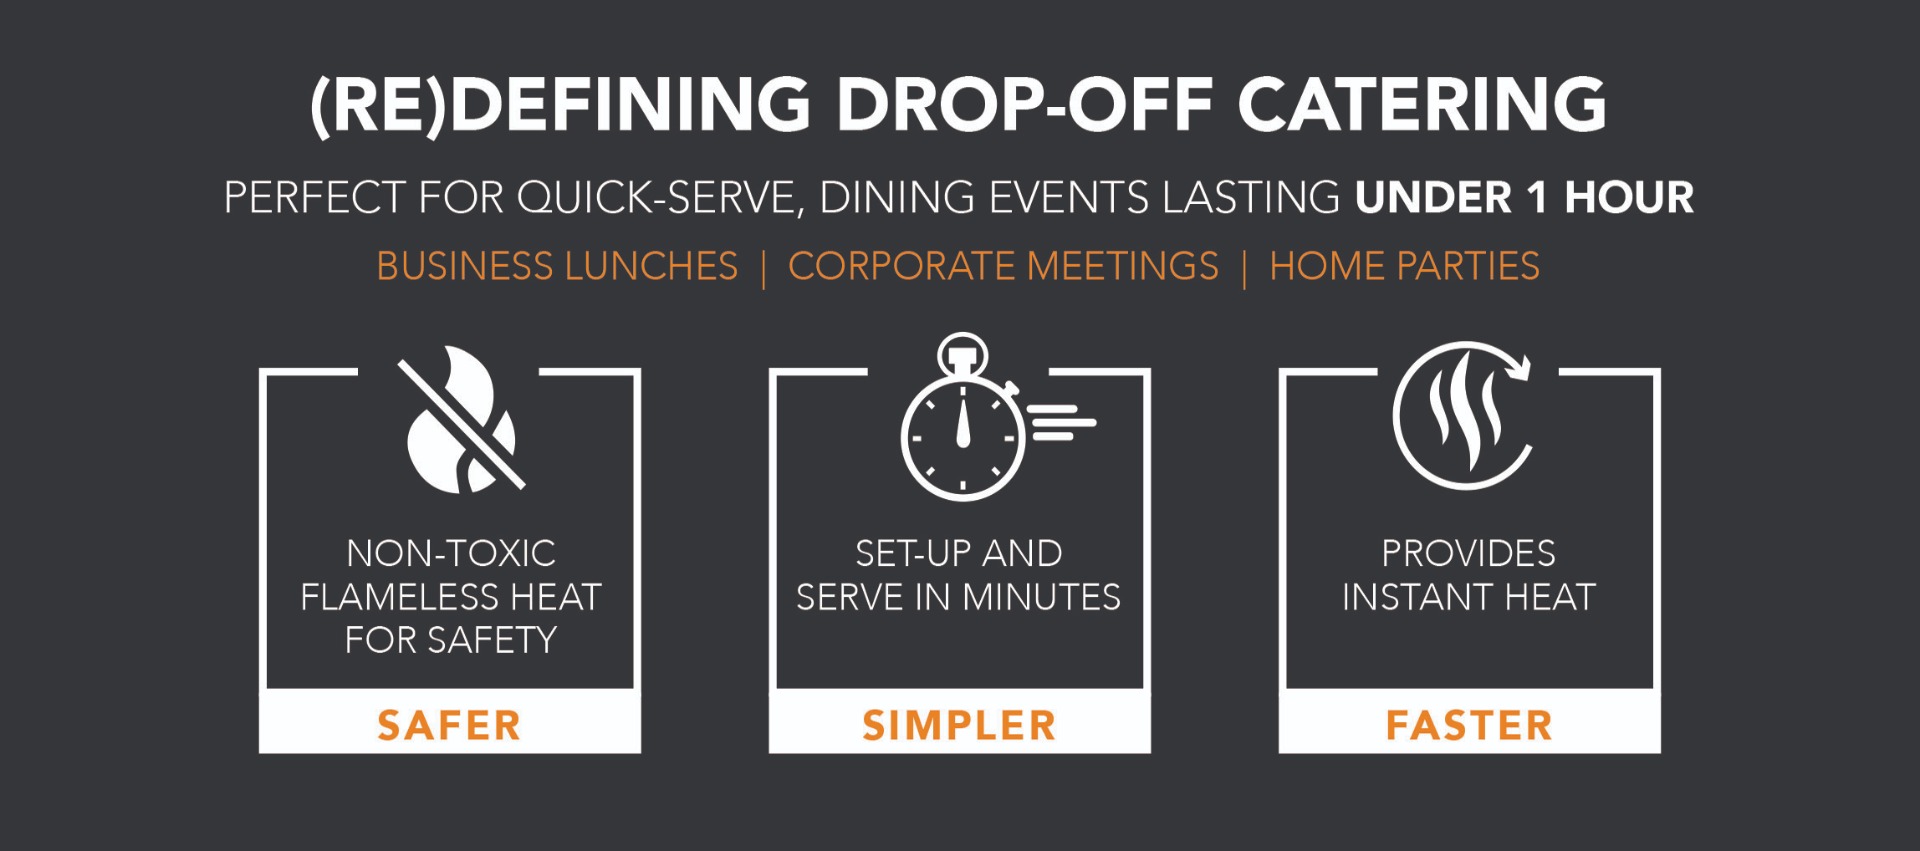 Redefining drop-off catering; Perfect for quick-serve, dining events lasting under 1 hour; Safer, simpler, faster